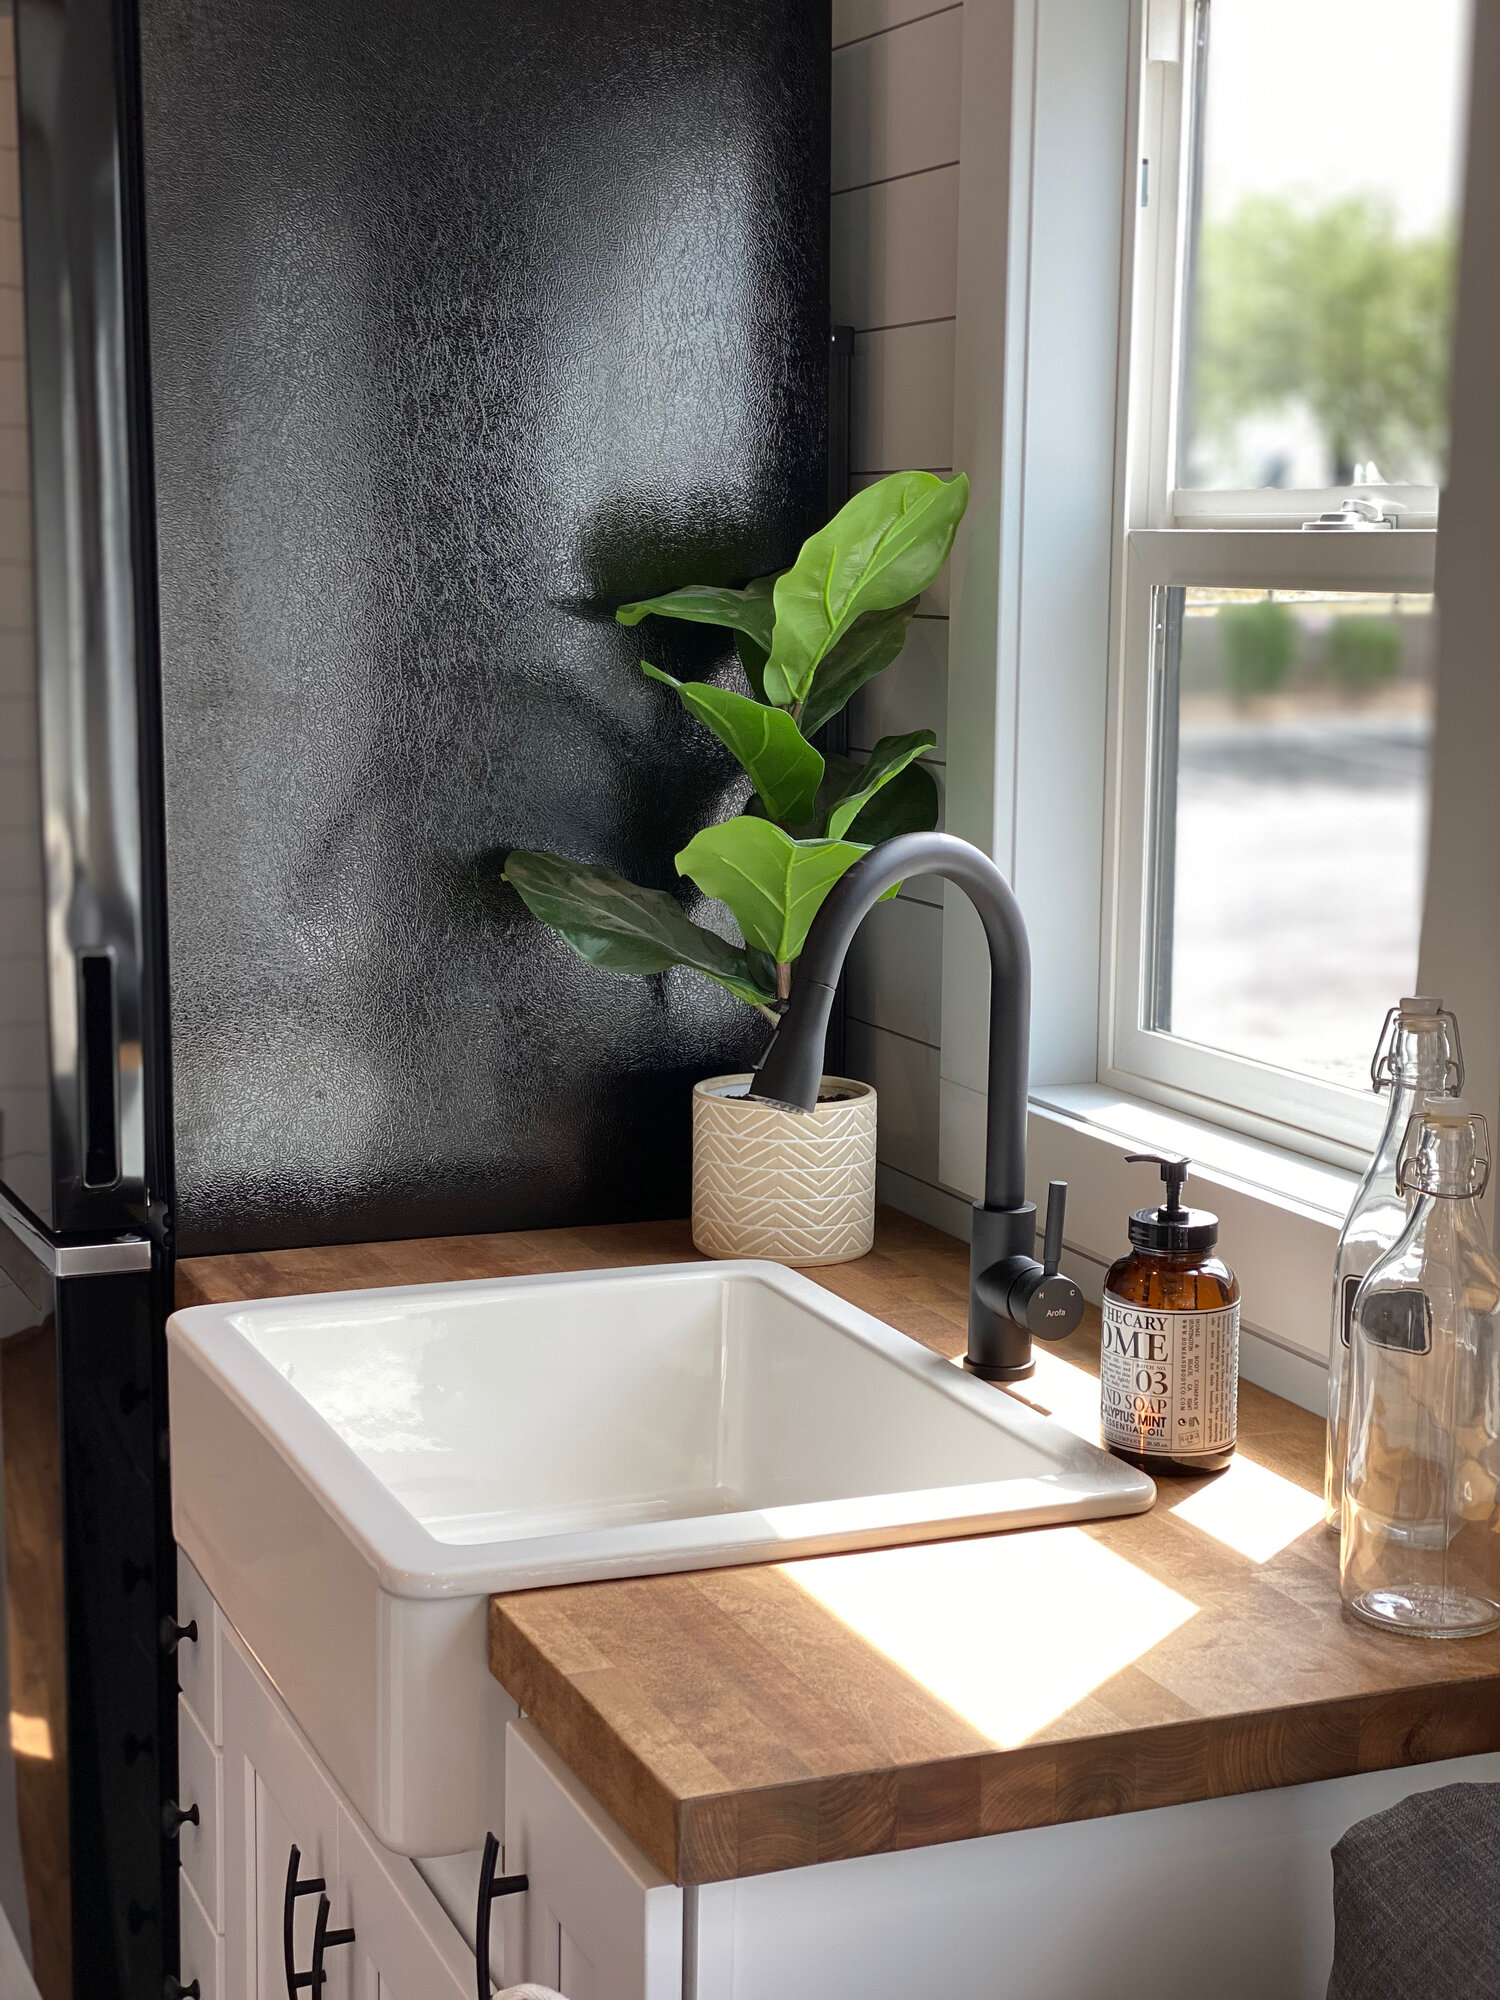 Farm Sink - Lauren's Flat by Uncharted Tiny Homes